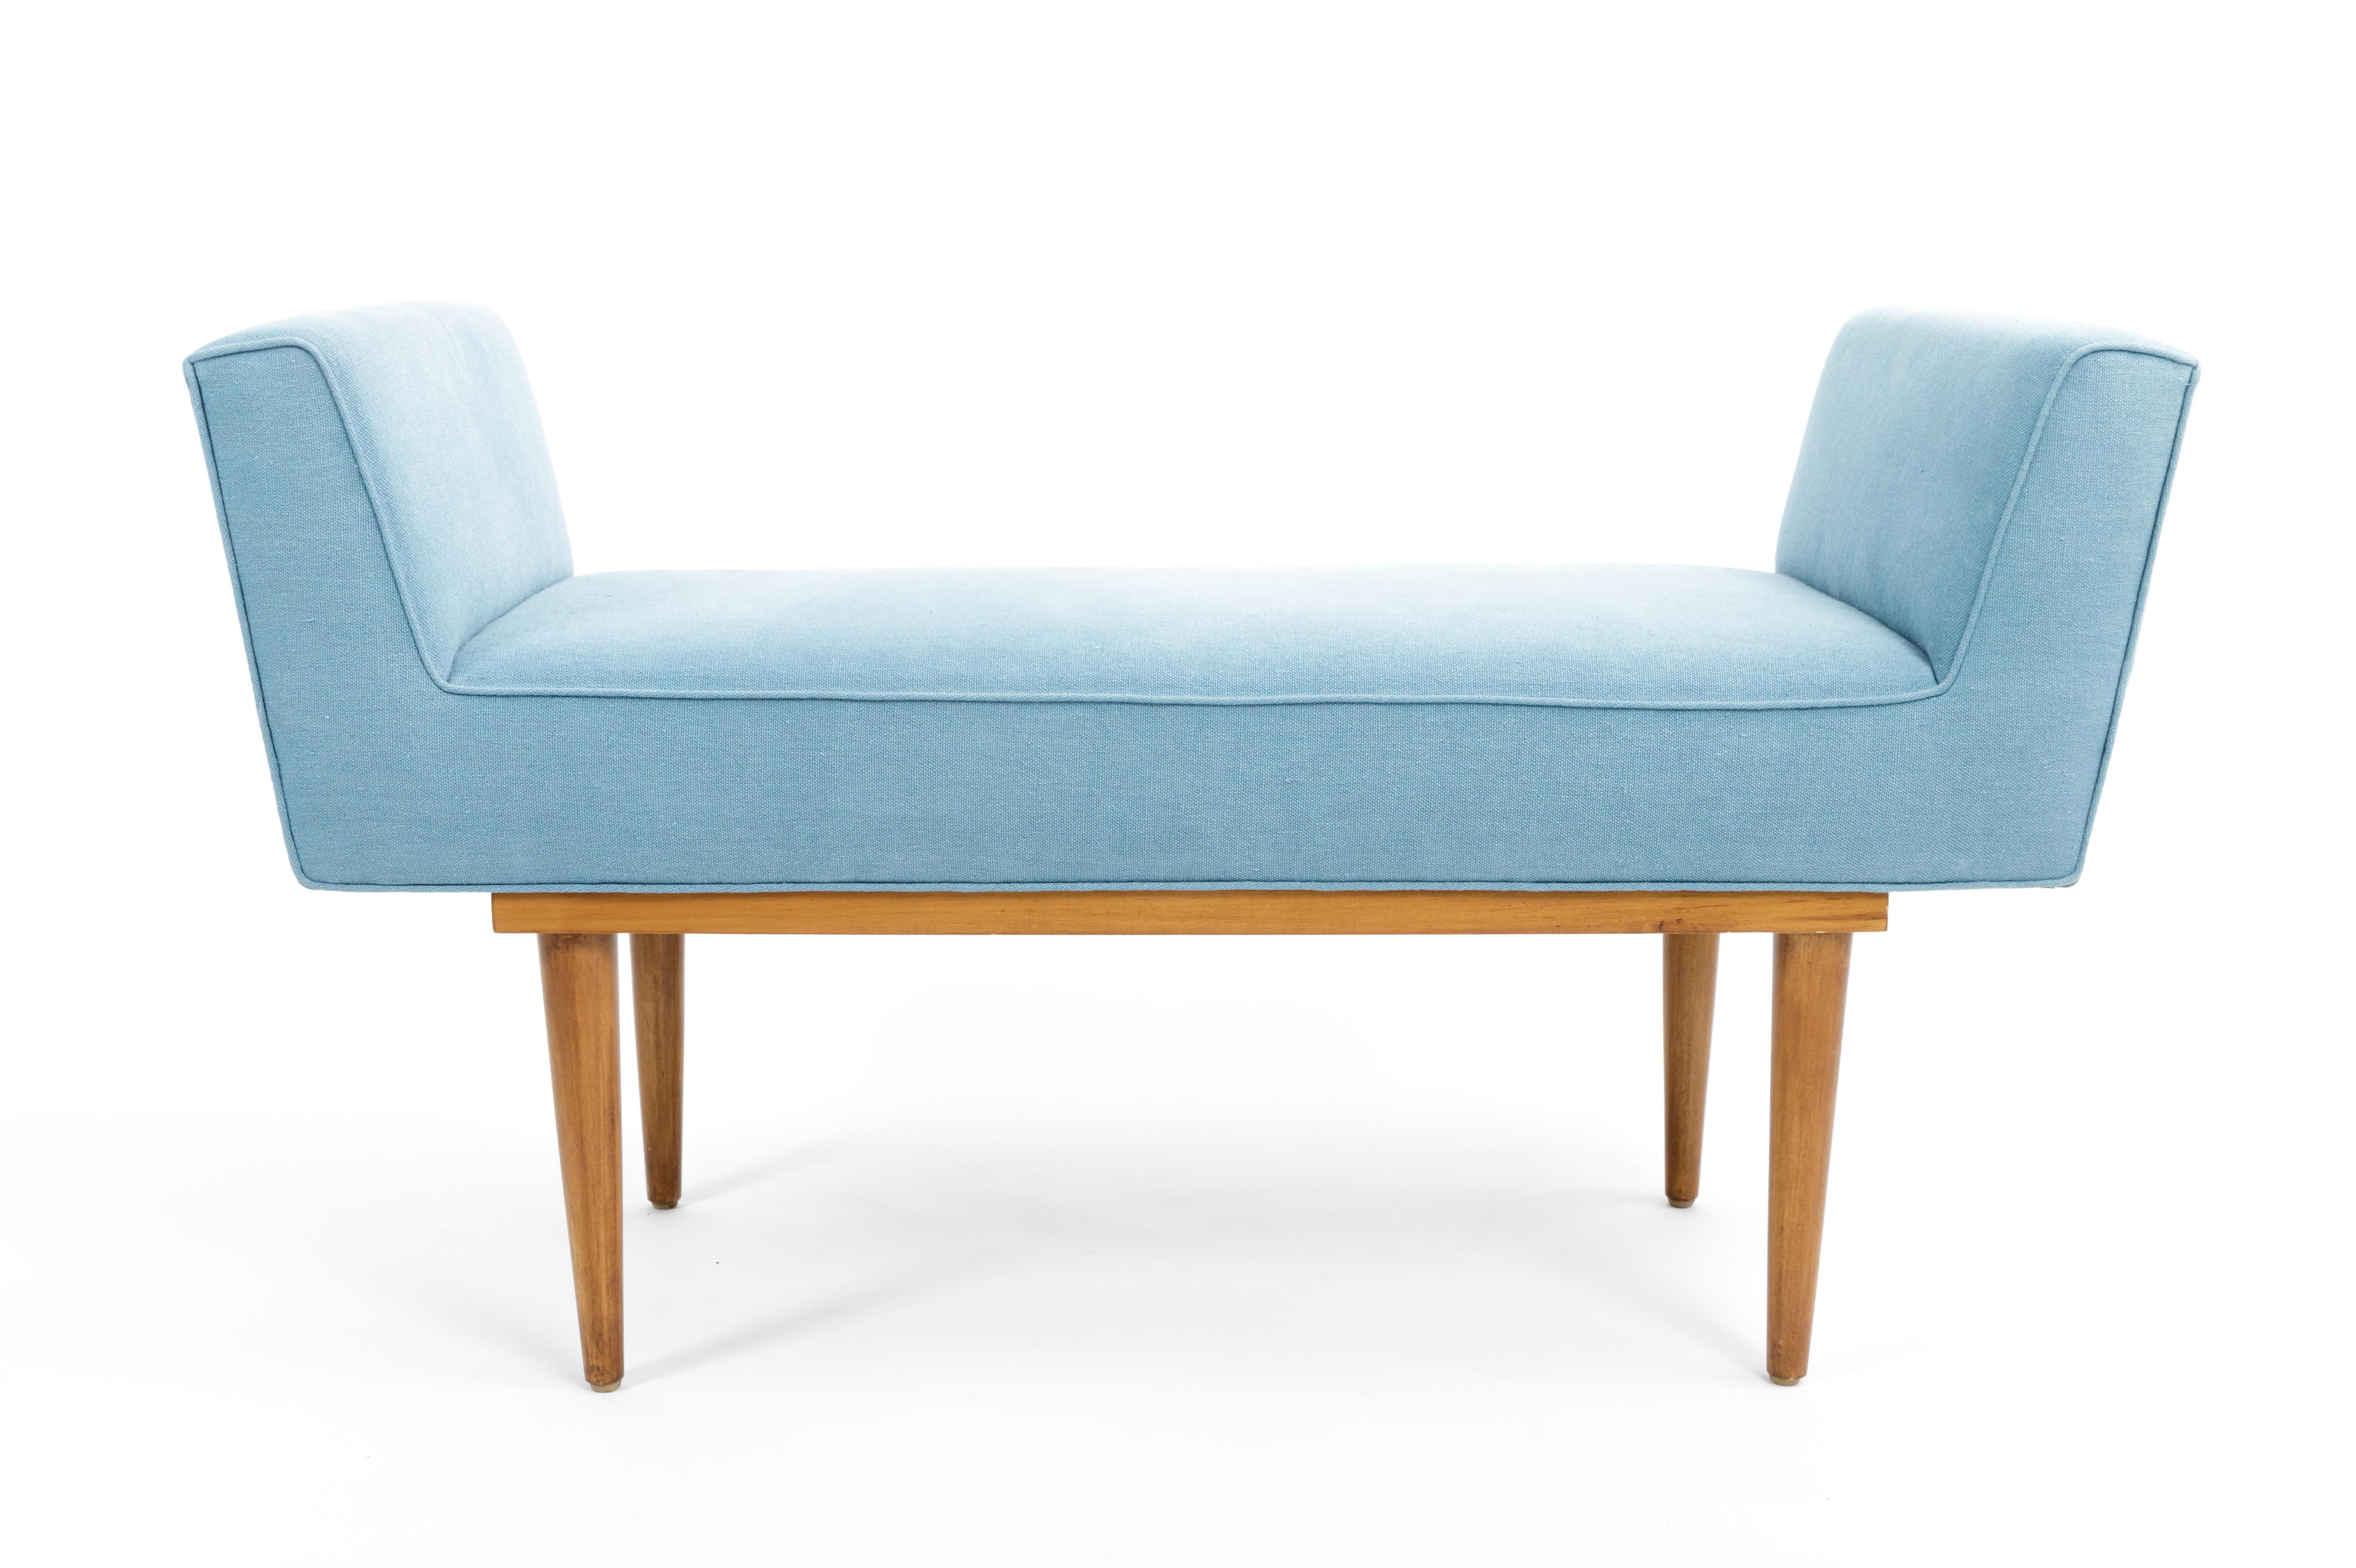 Elegant mid-century boudoir bench, c. 20th century. 

Simple yet sophisticated design consists of a handsome wood base and upholstered arms and seat. The bench in great vintage condition and has been newly recovered in a denim blue linen. 

